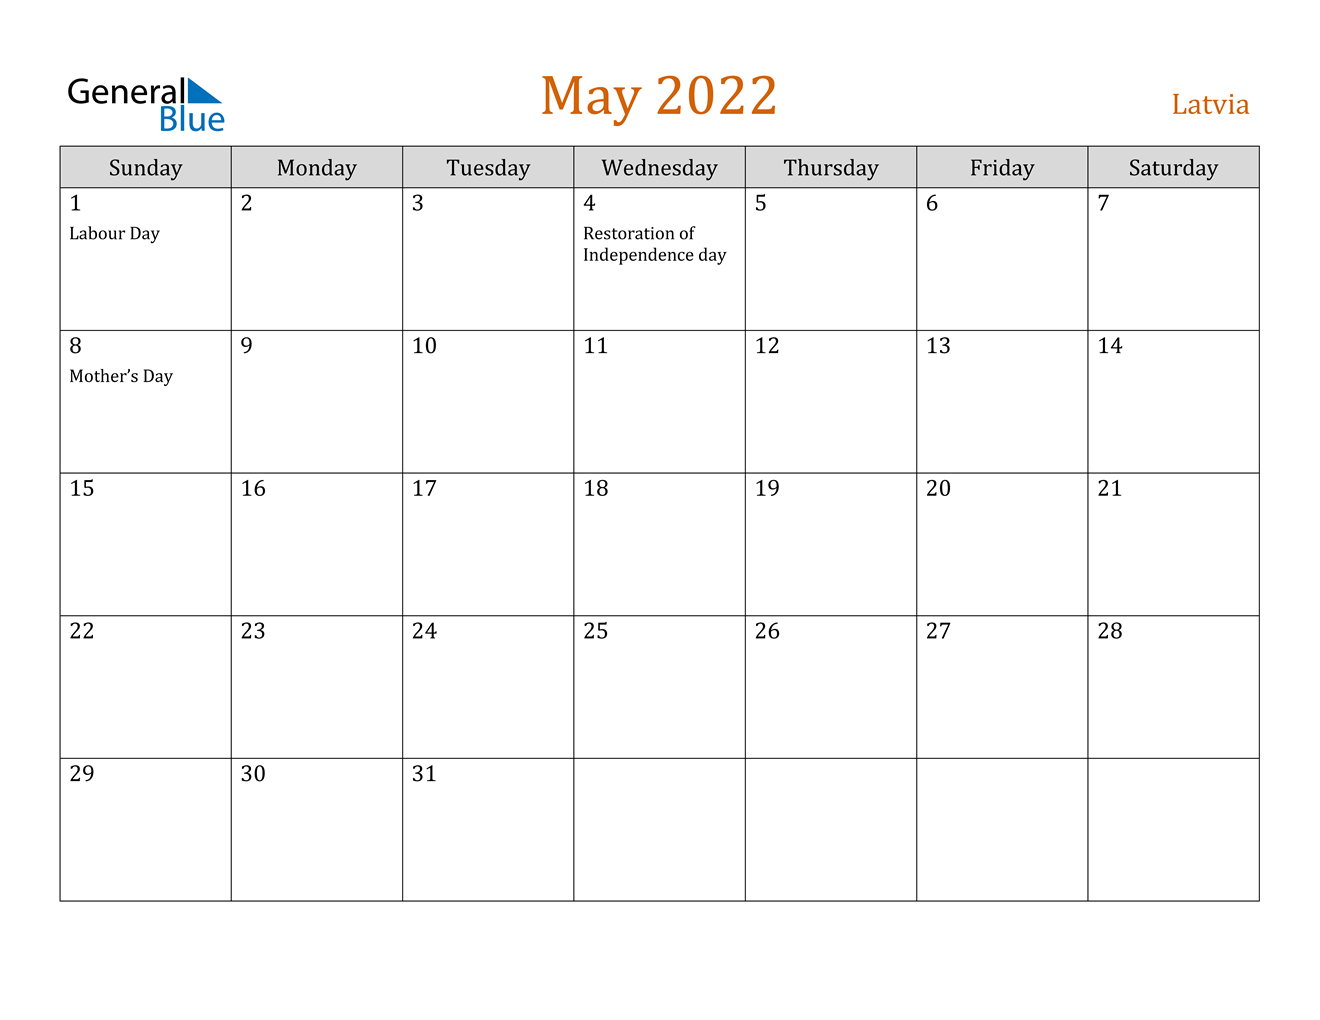 Catch May 2022 Calendar Images